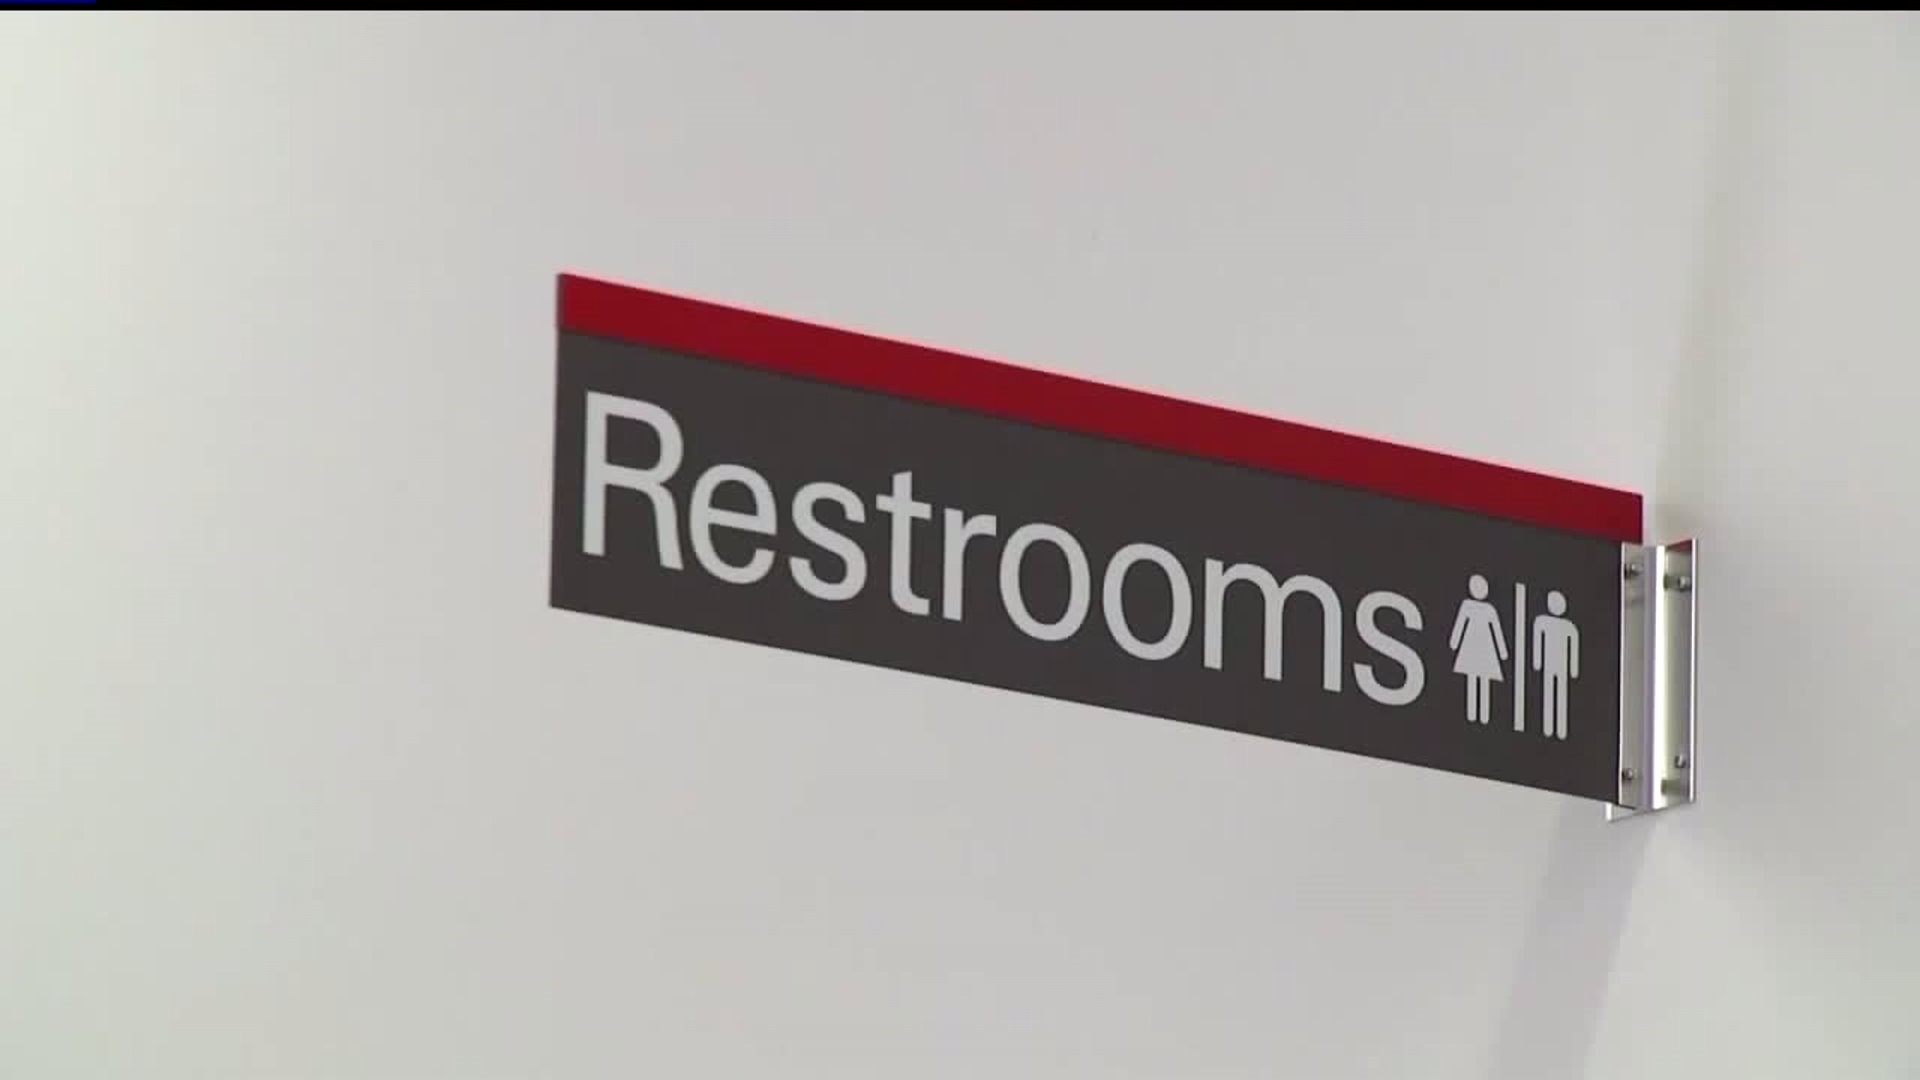 Public speaks out about transgender bathroom topic at Lancaster County school